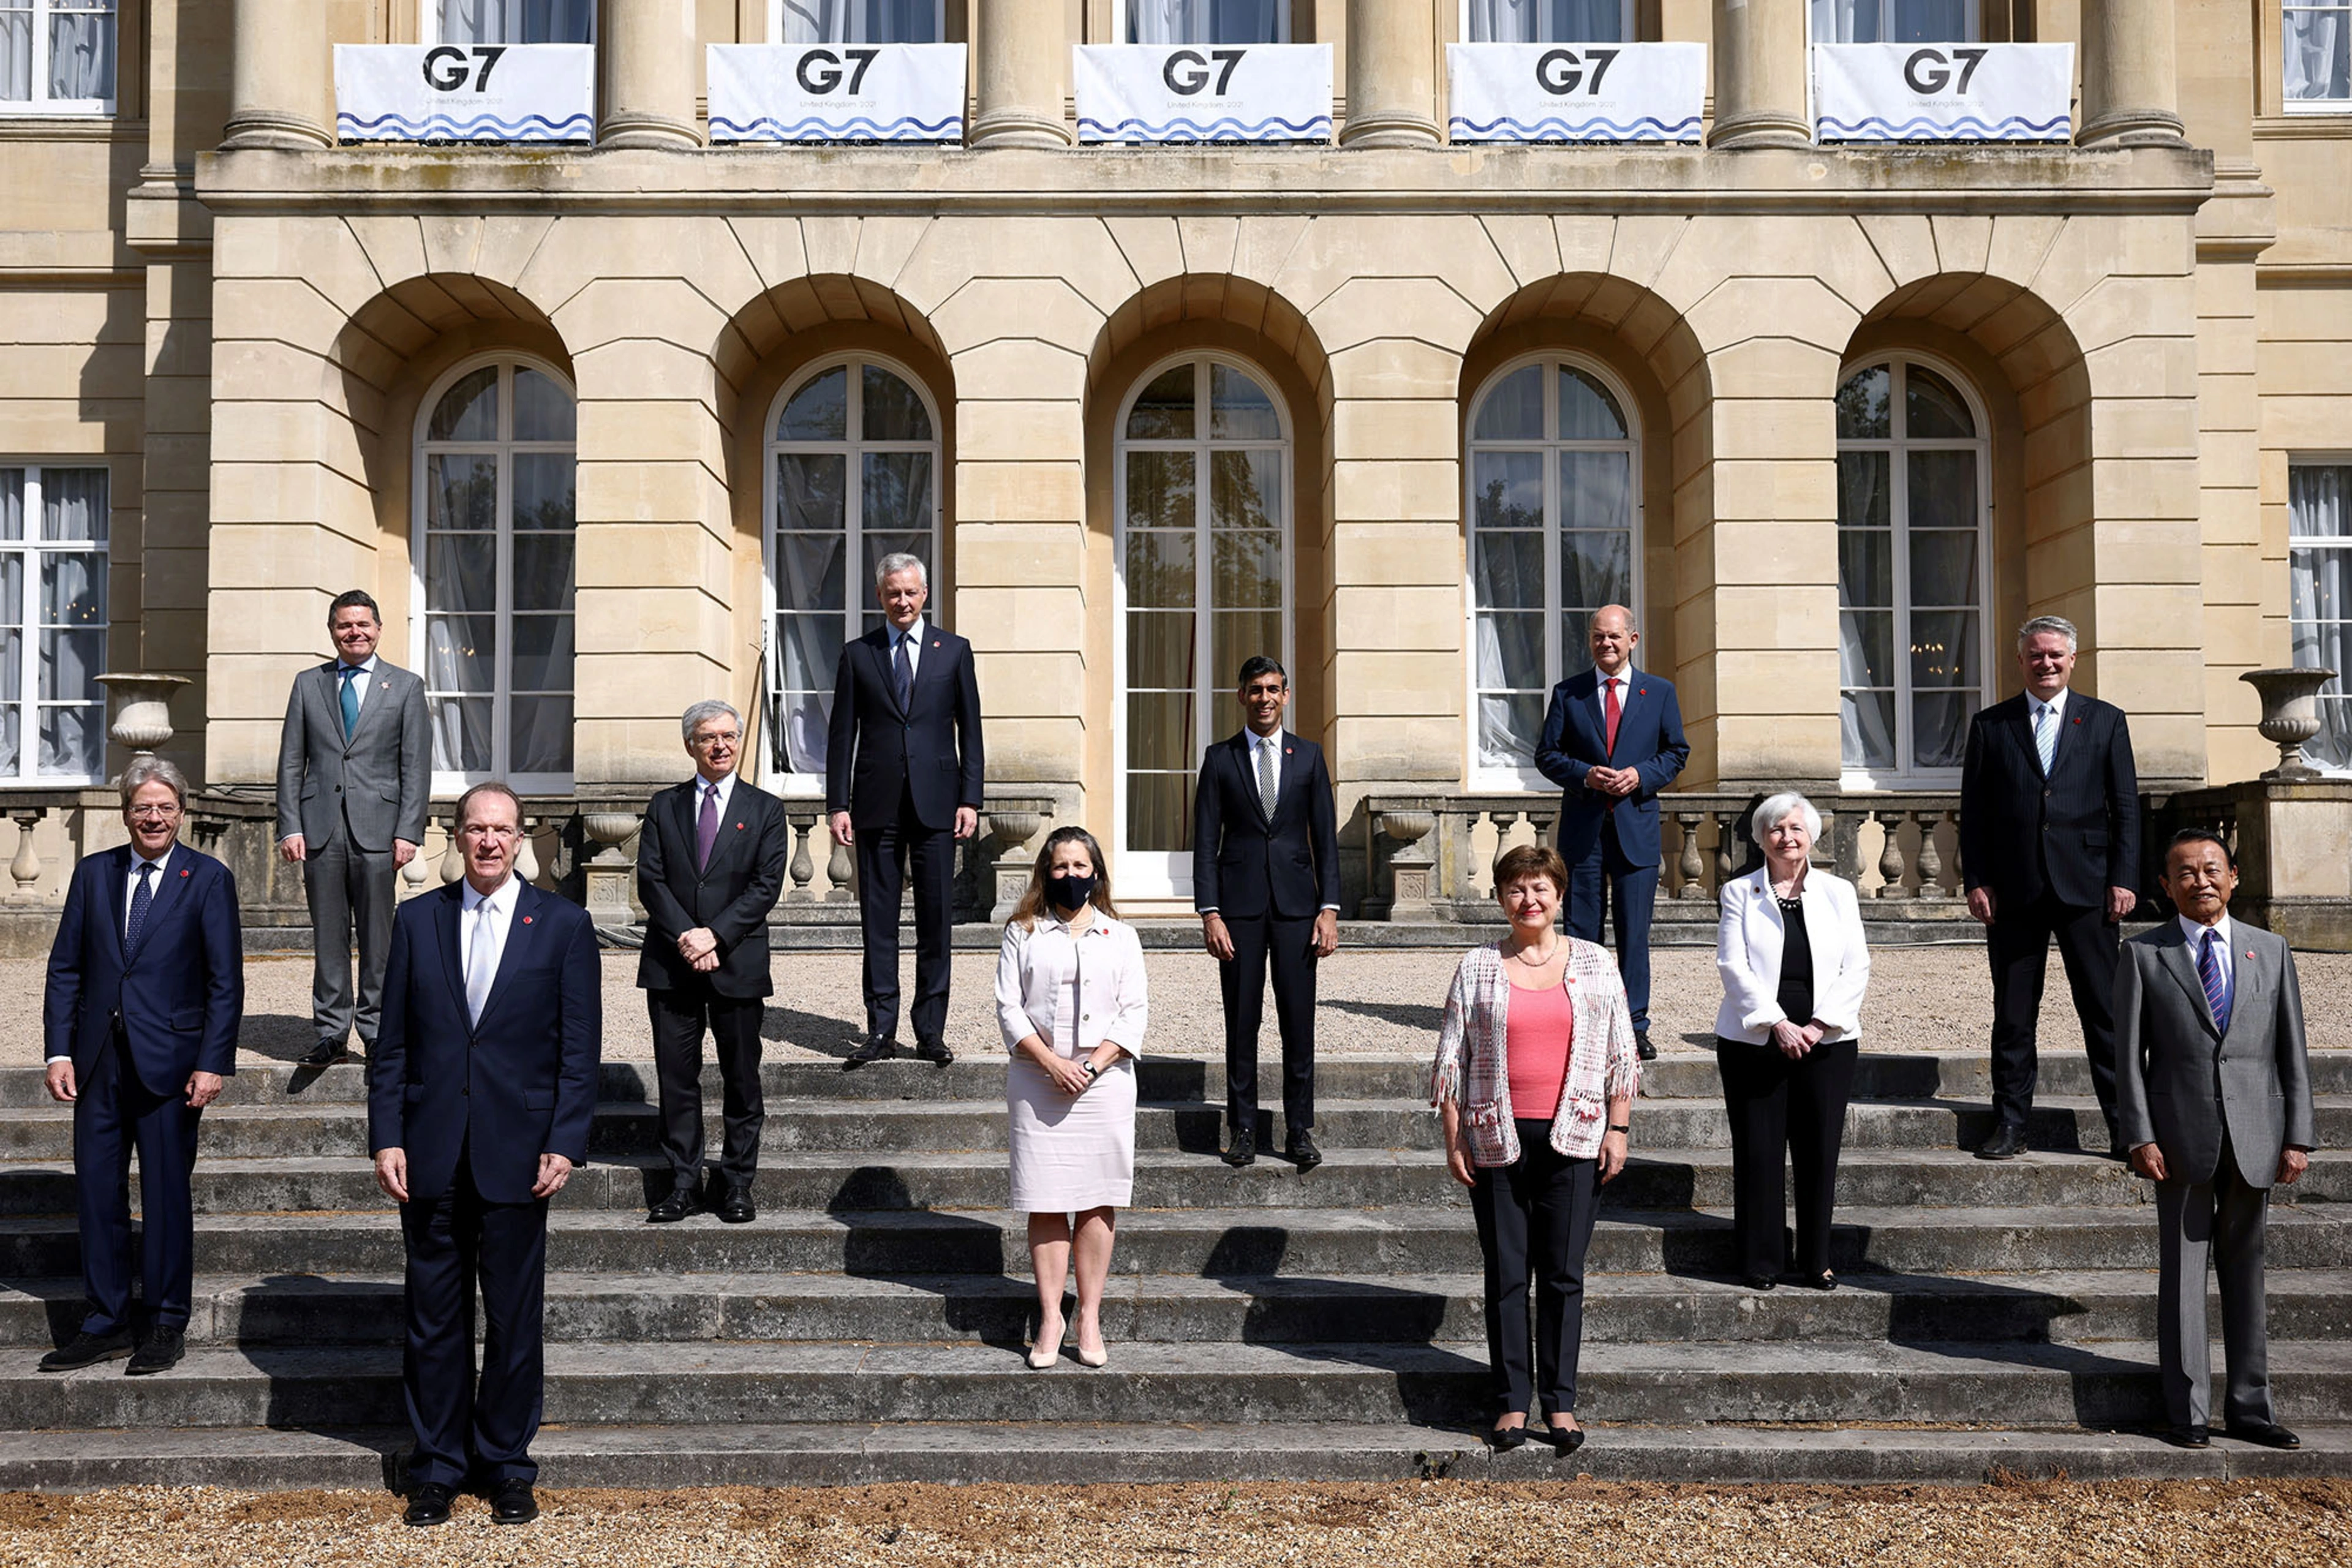 Group of Seven (G7) finance ministers pose for a photo during a meeting in London in June 2021.